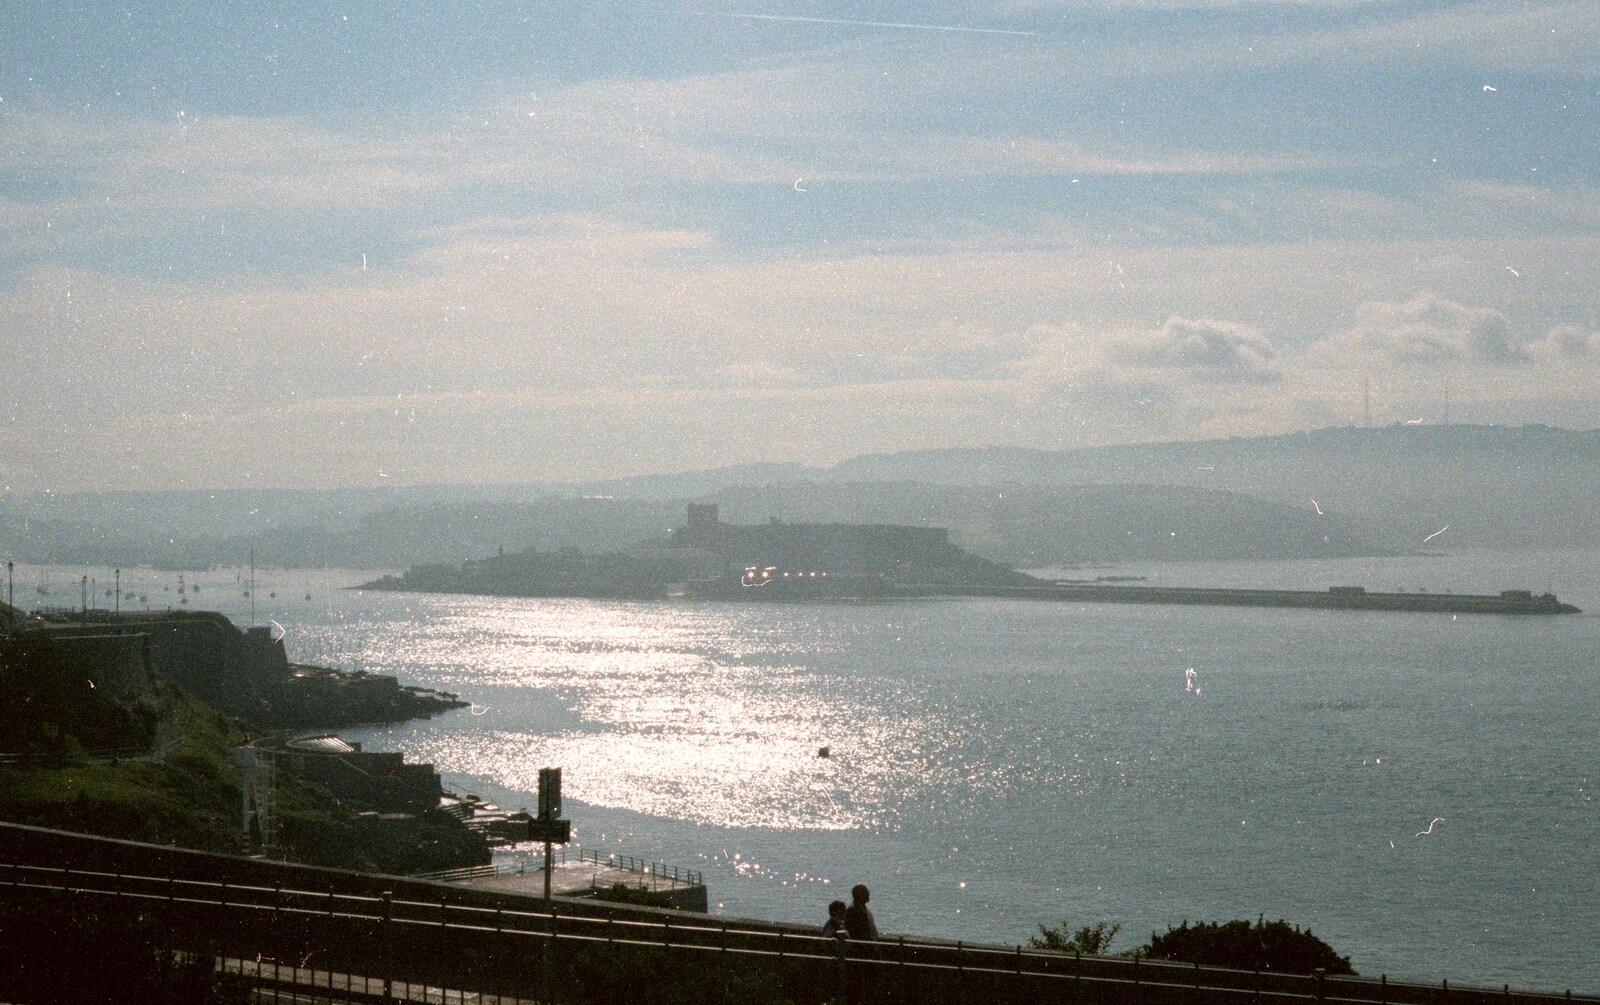 Mountbatten Point at The Sound from Uni: A Neath Road Summer, St. Jude's, Plymouth - 18th August 1987